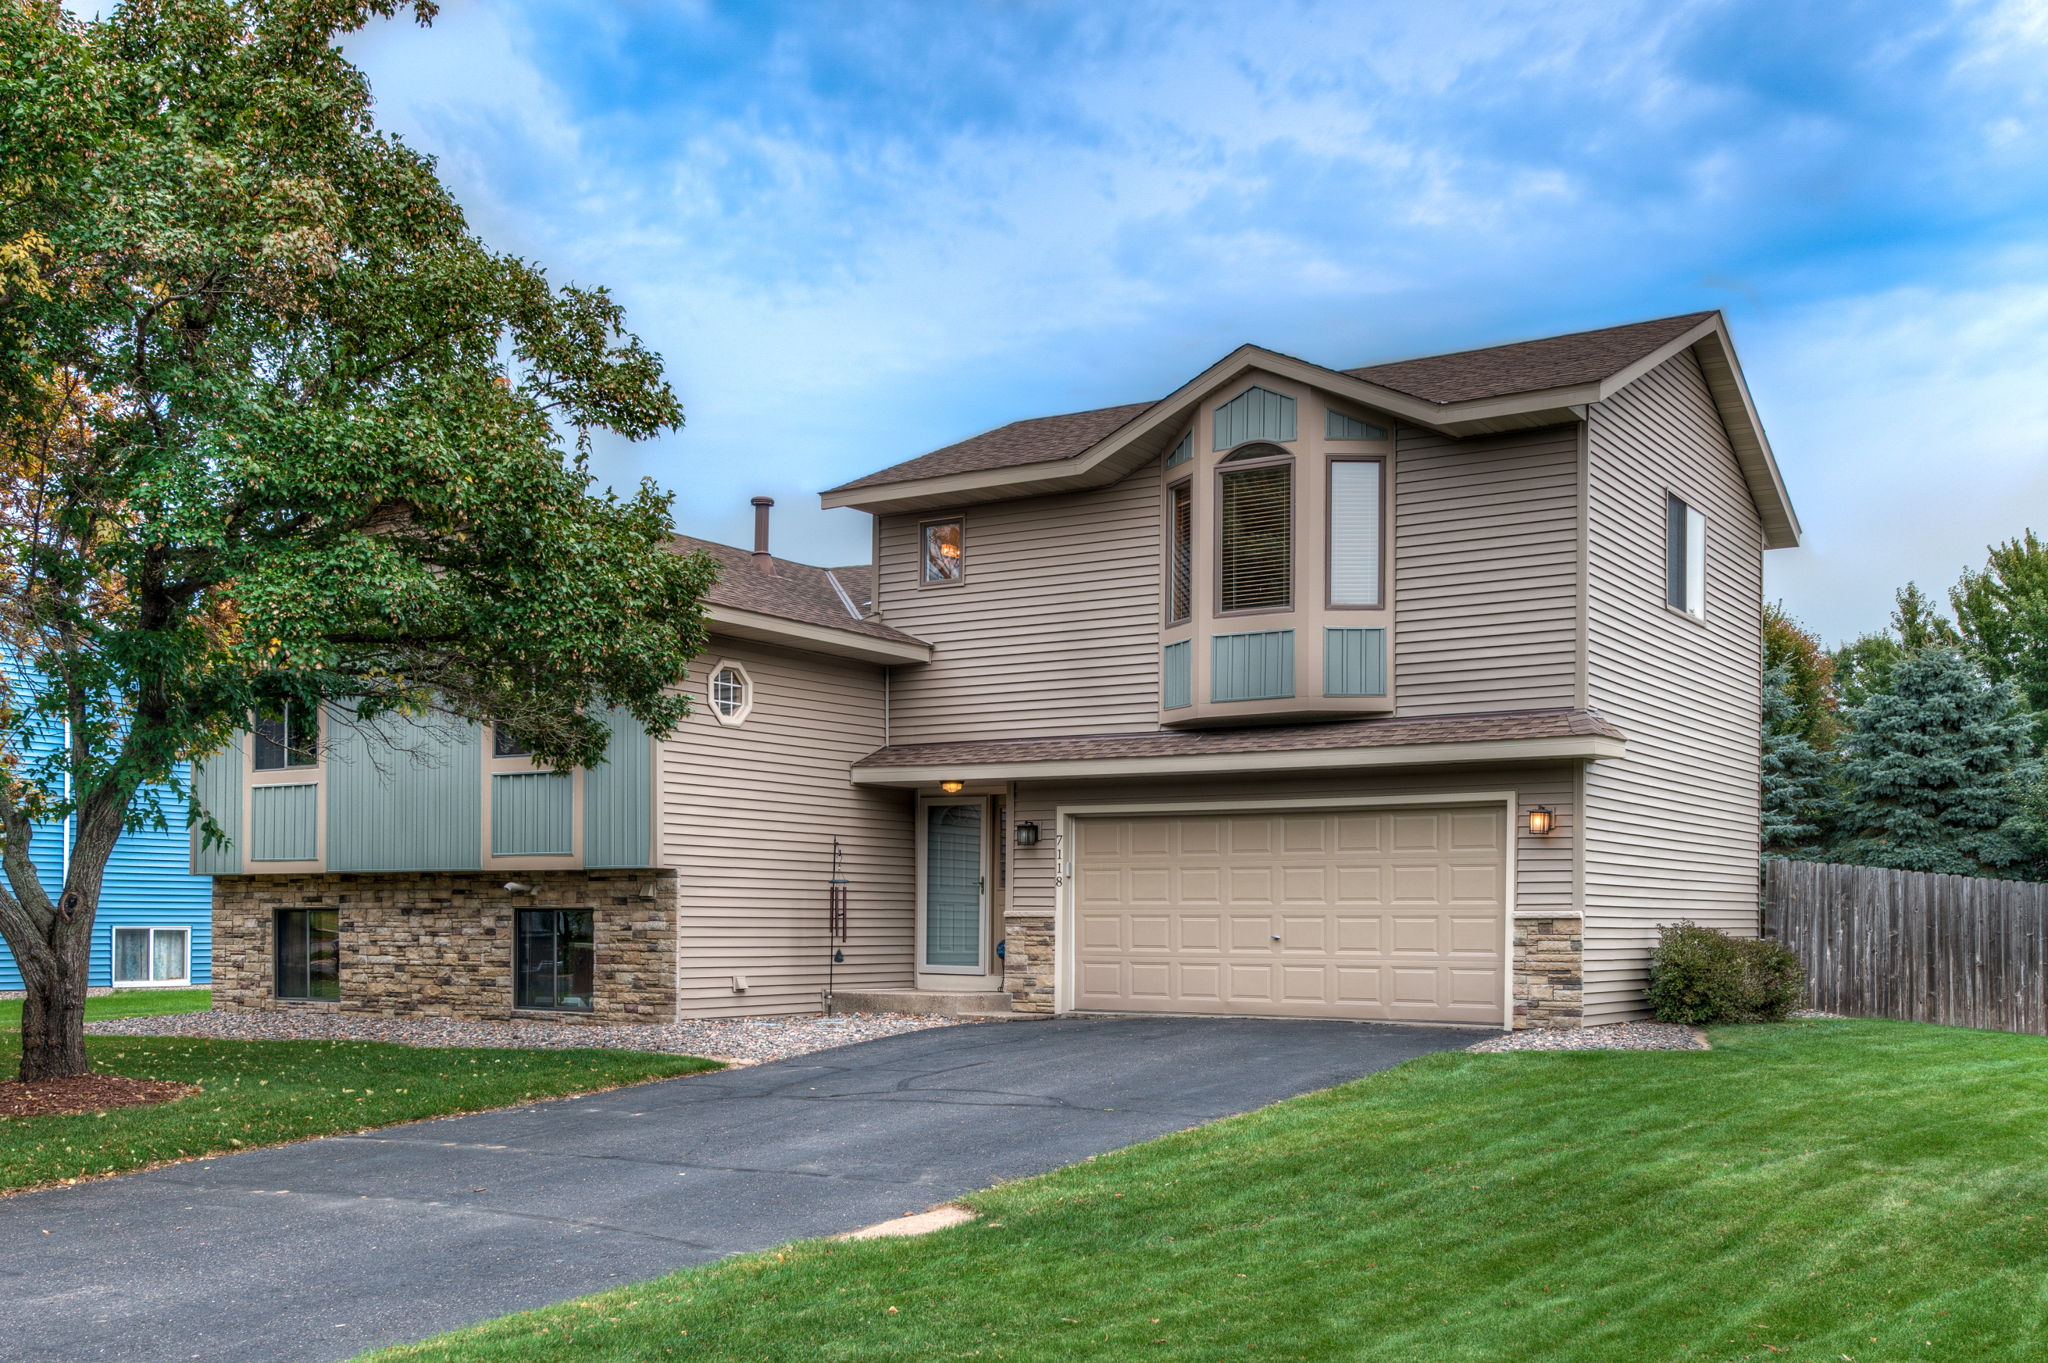  7118 Mourning Dove Rd, Lino Lakes, MN 55014, US